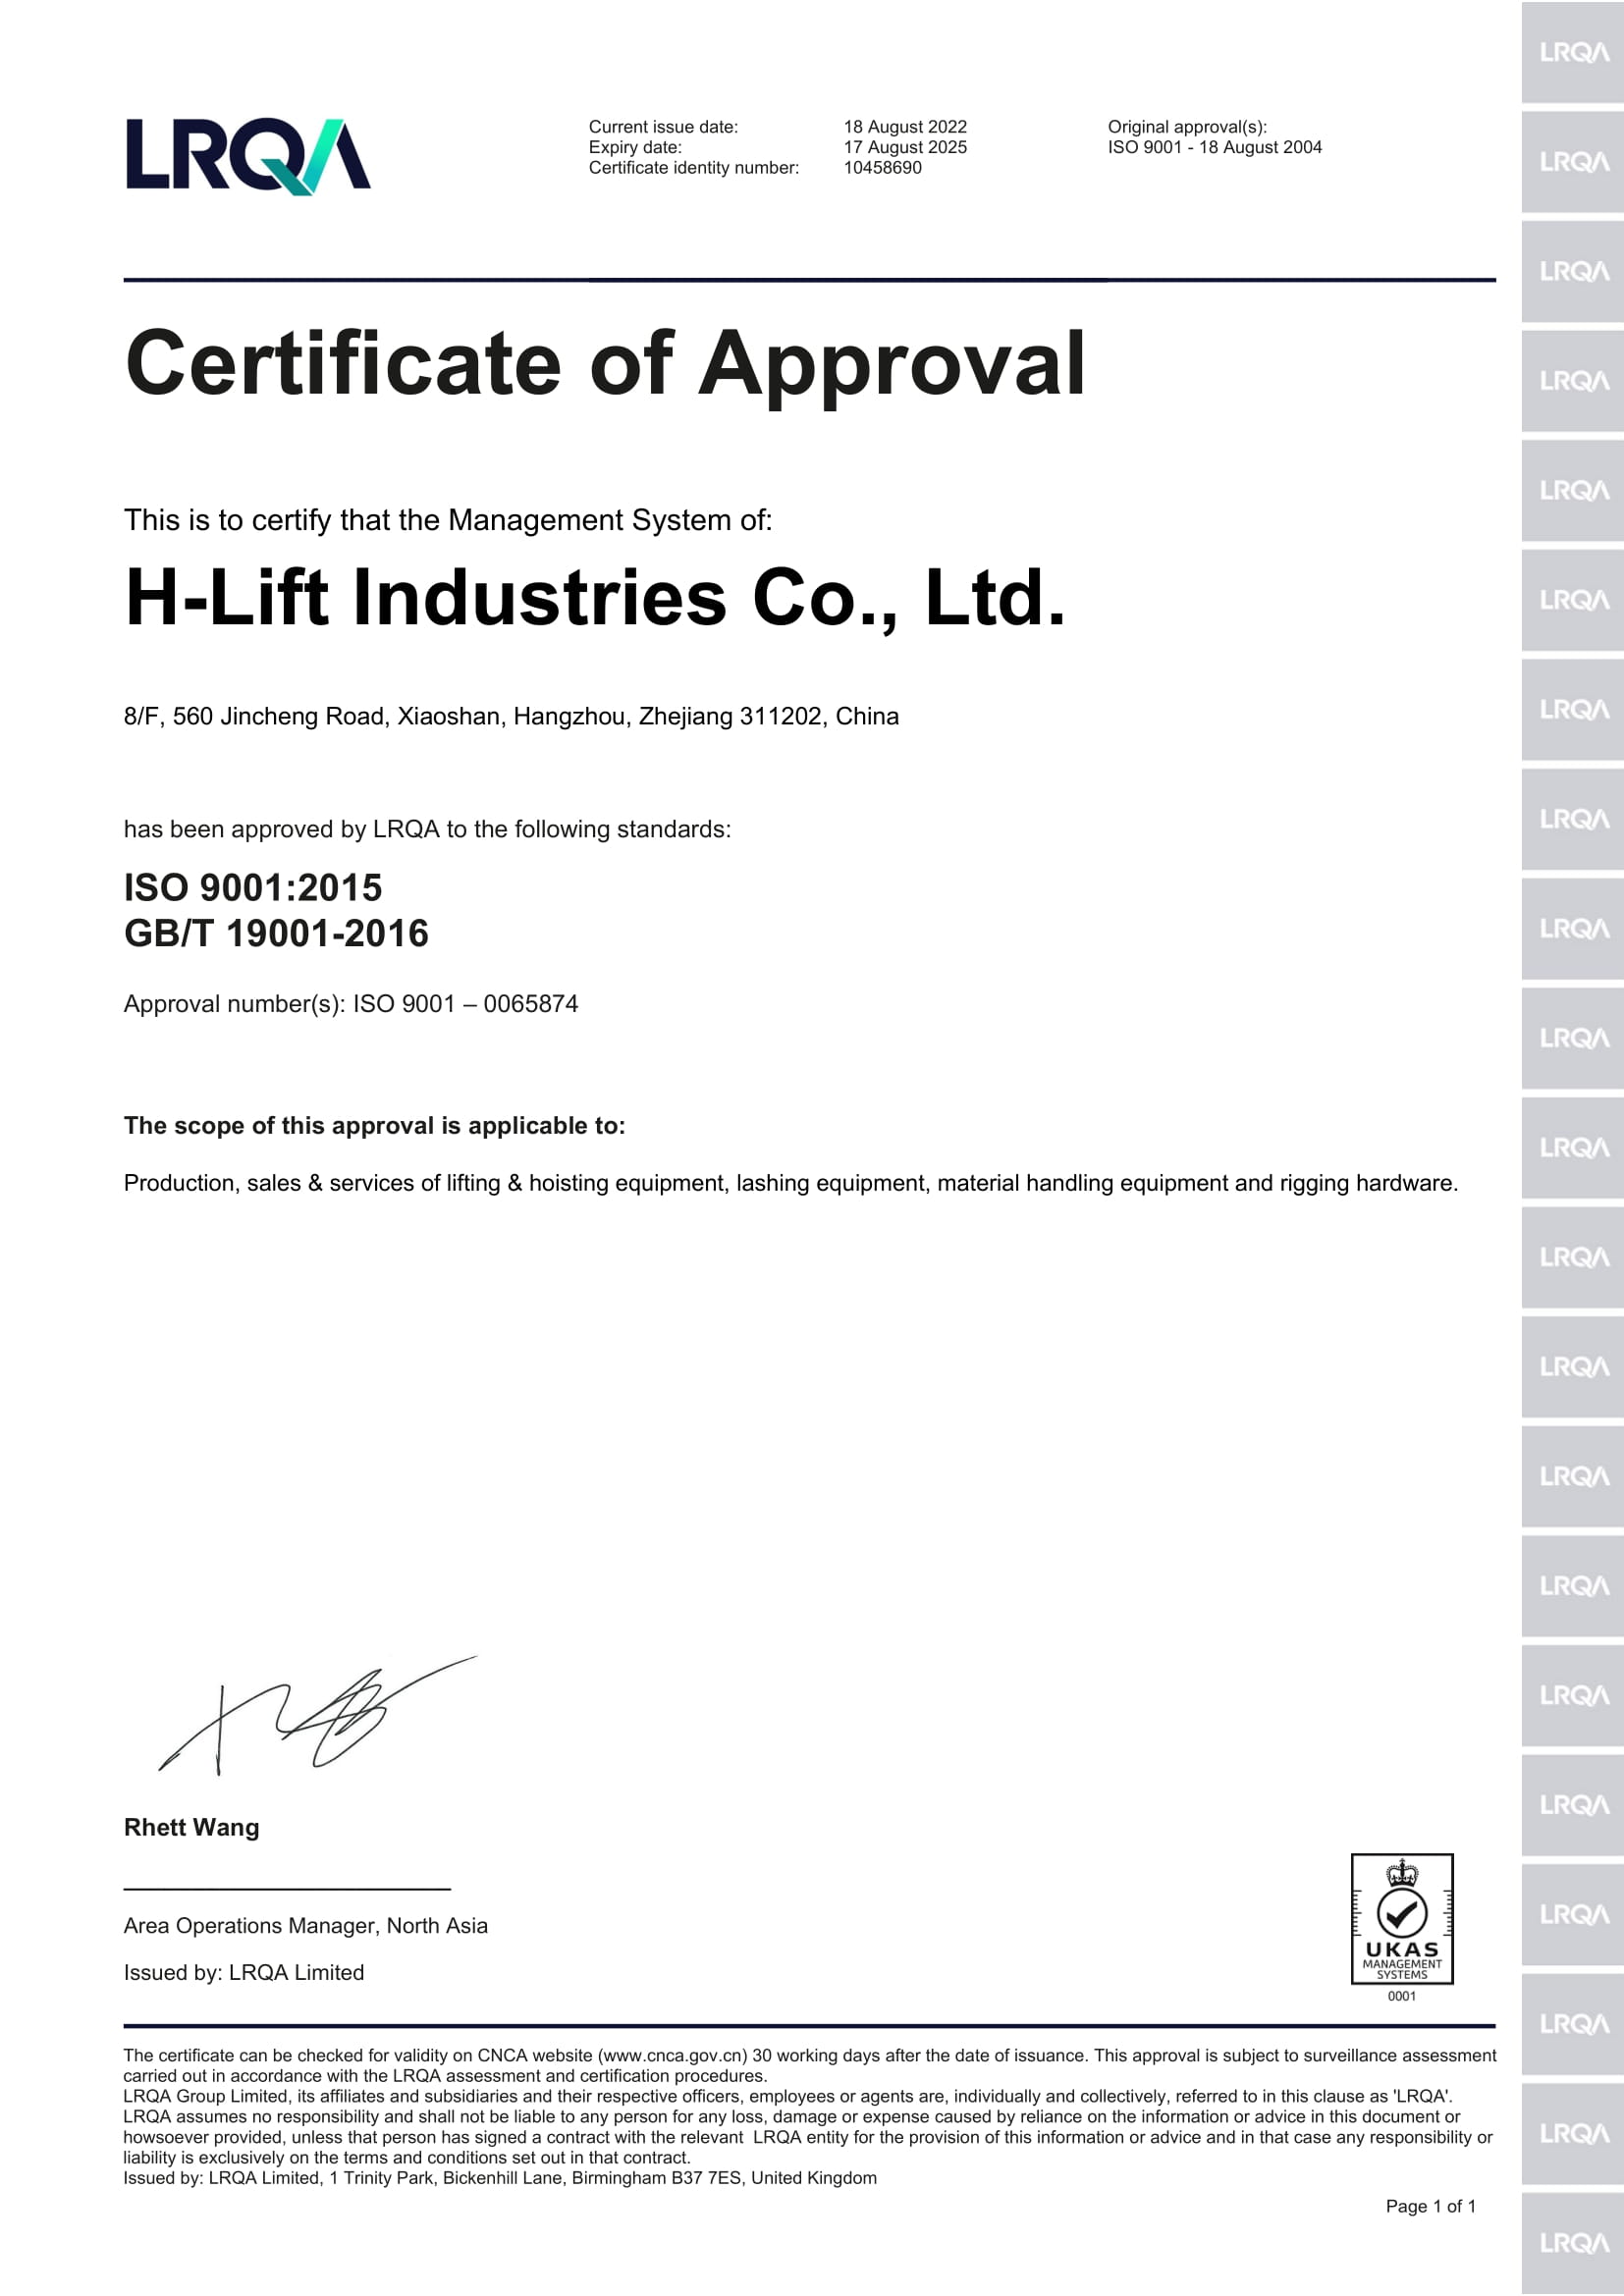 H-LIFT ISO 9001 CERTIFICATE OF APPROVAL